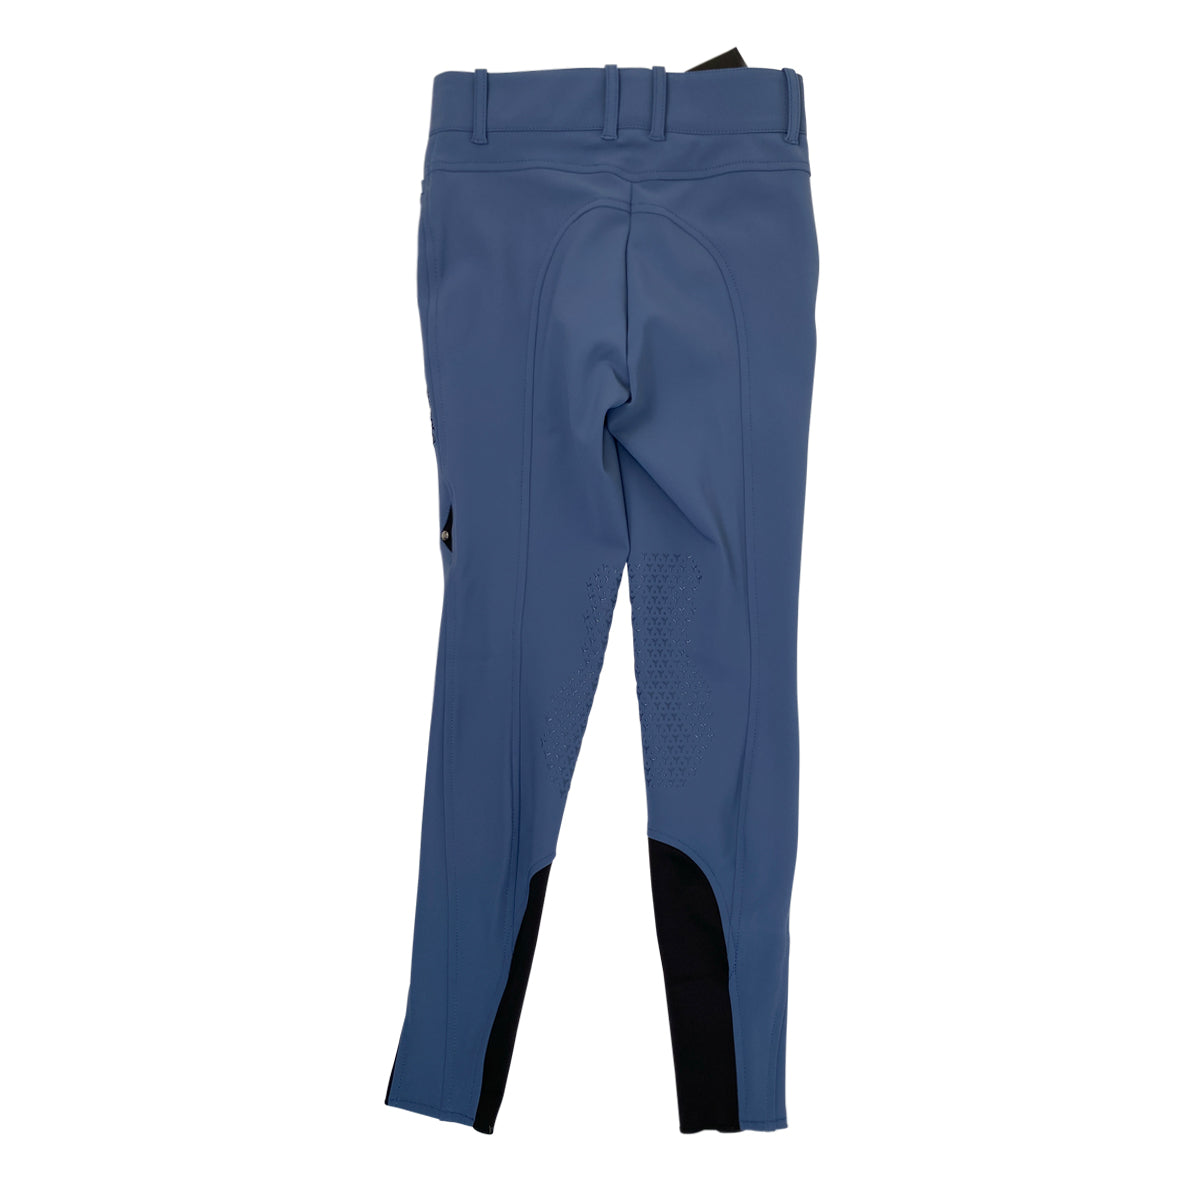 Equiline 'Ernaek' B-Move Breeches in Tempest 